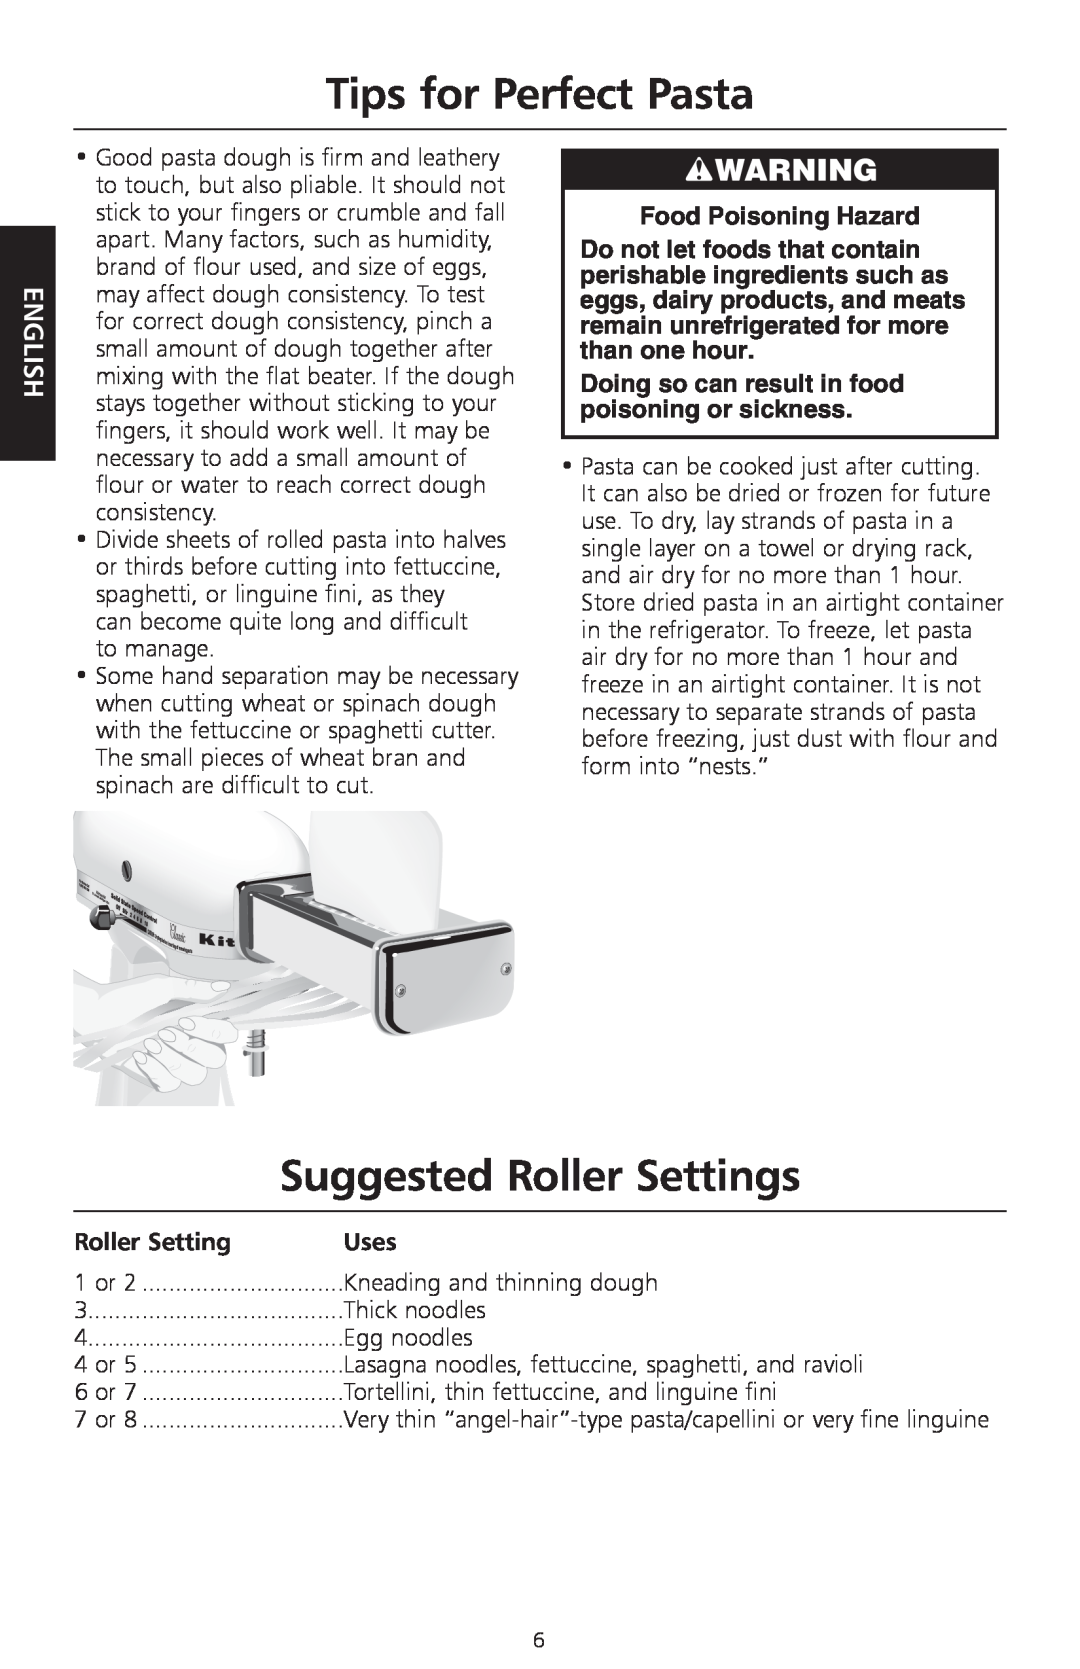 KitchenAid KPEX manual Tips for Perfect Pasta, Suggested Roller Settings, English, Uses 